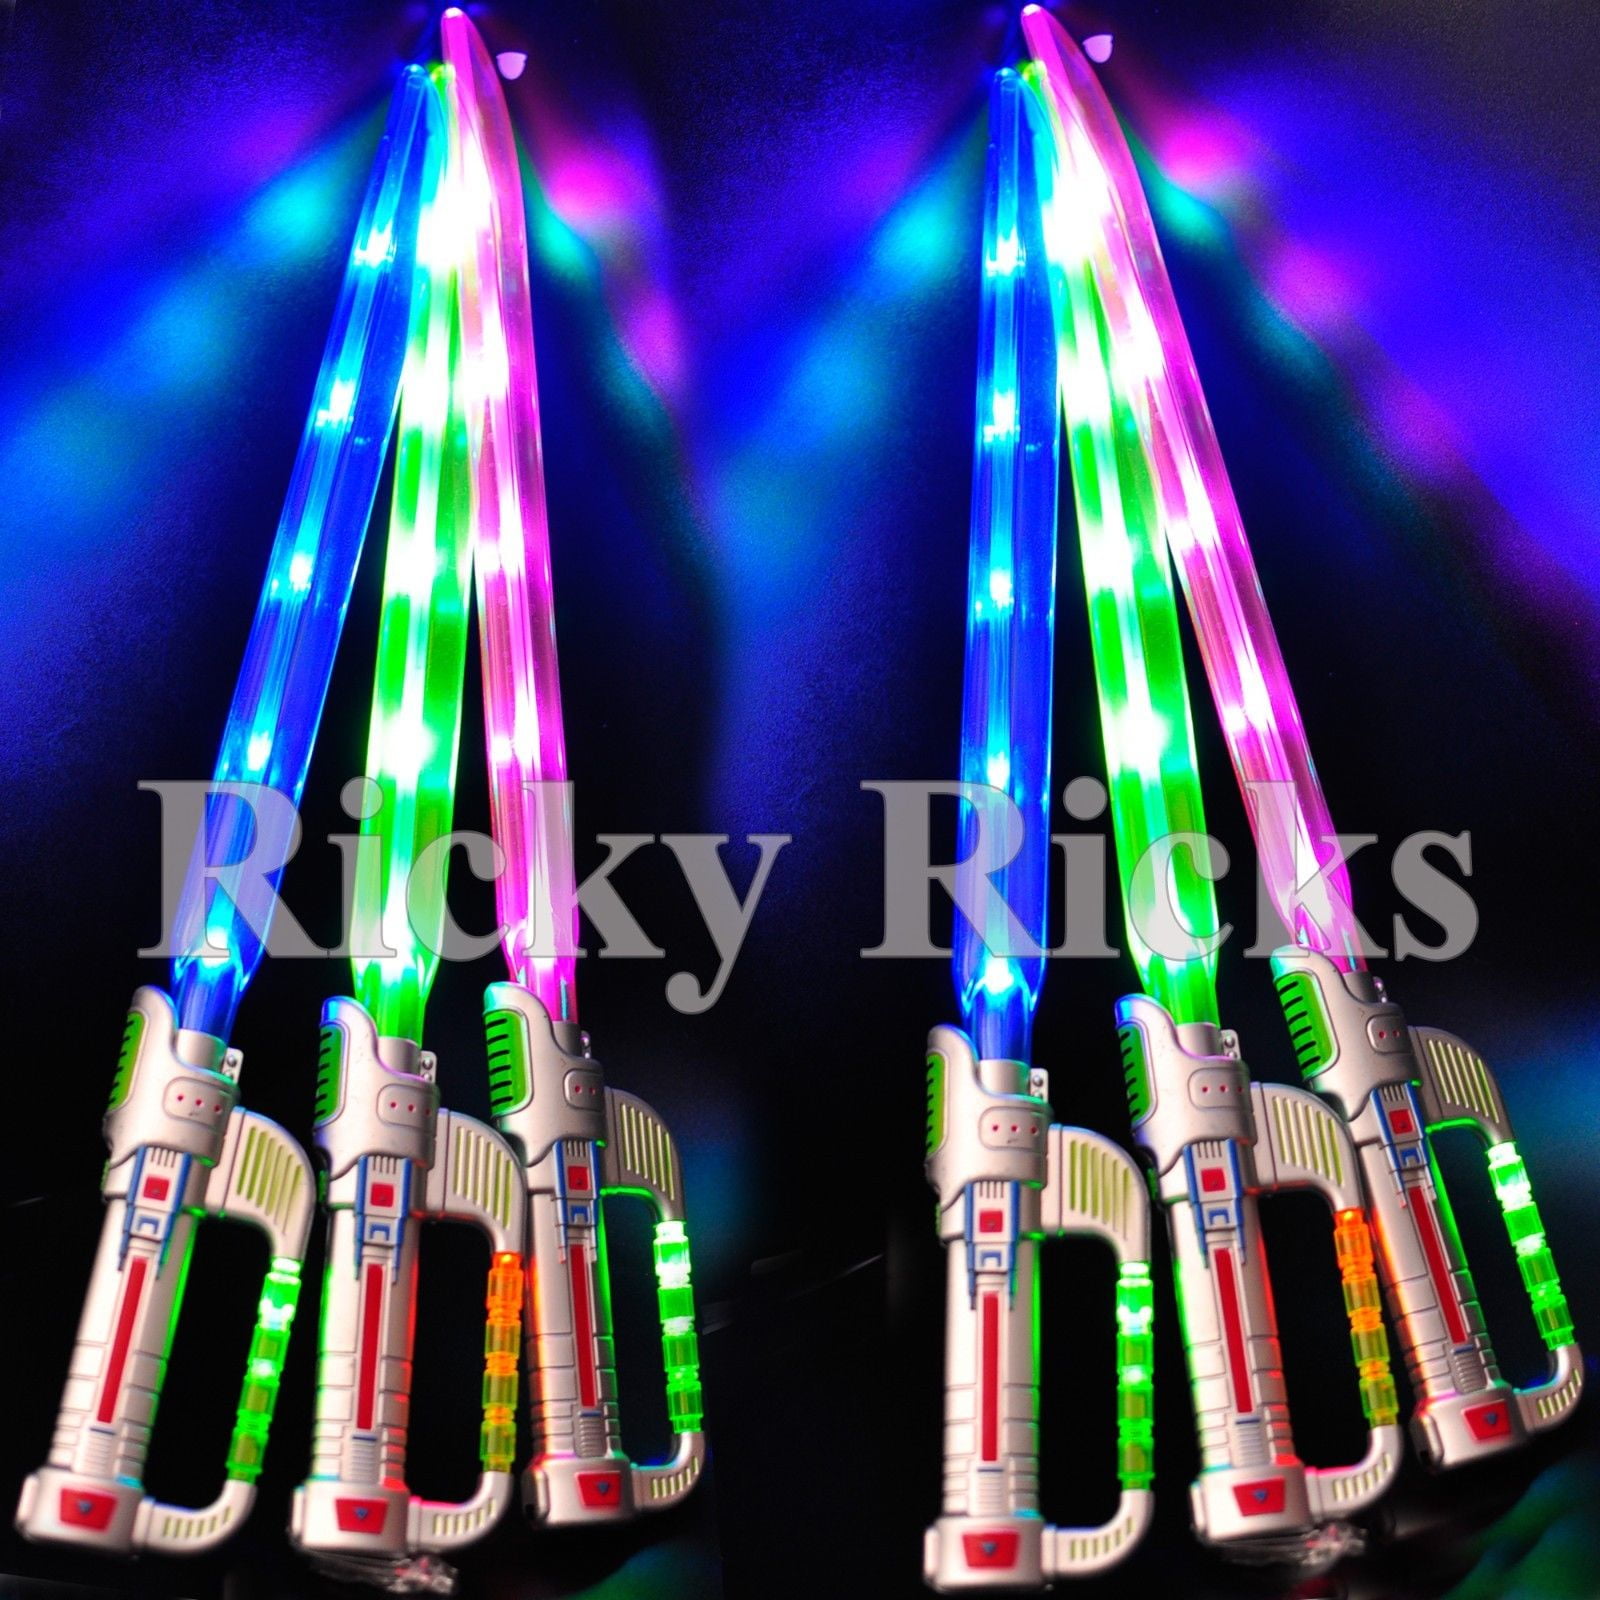 2 Light Up Swords lightsable star Motion Activated Sound Flashing Ninja Pirate 